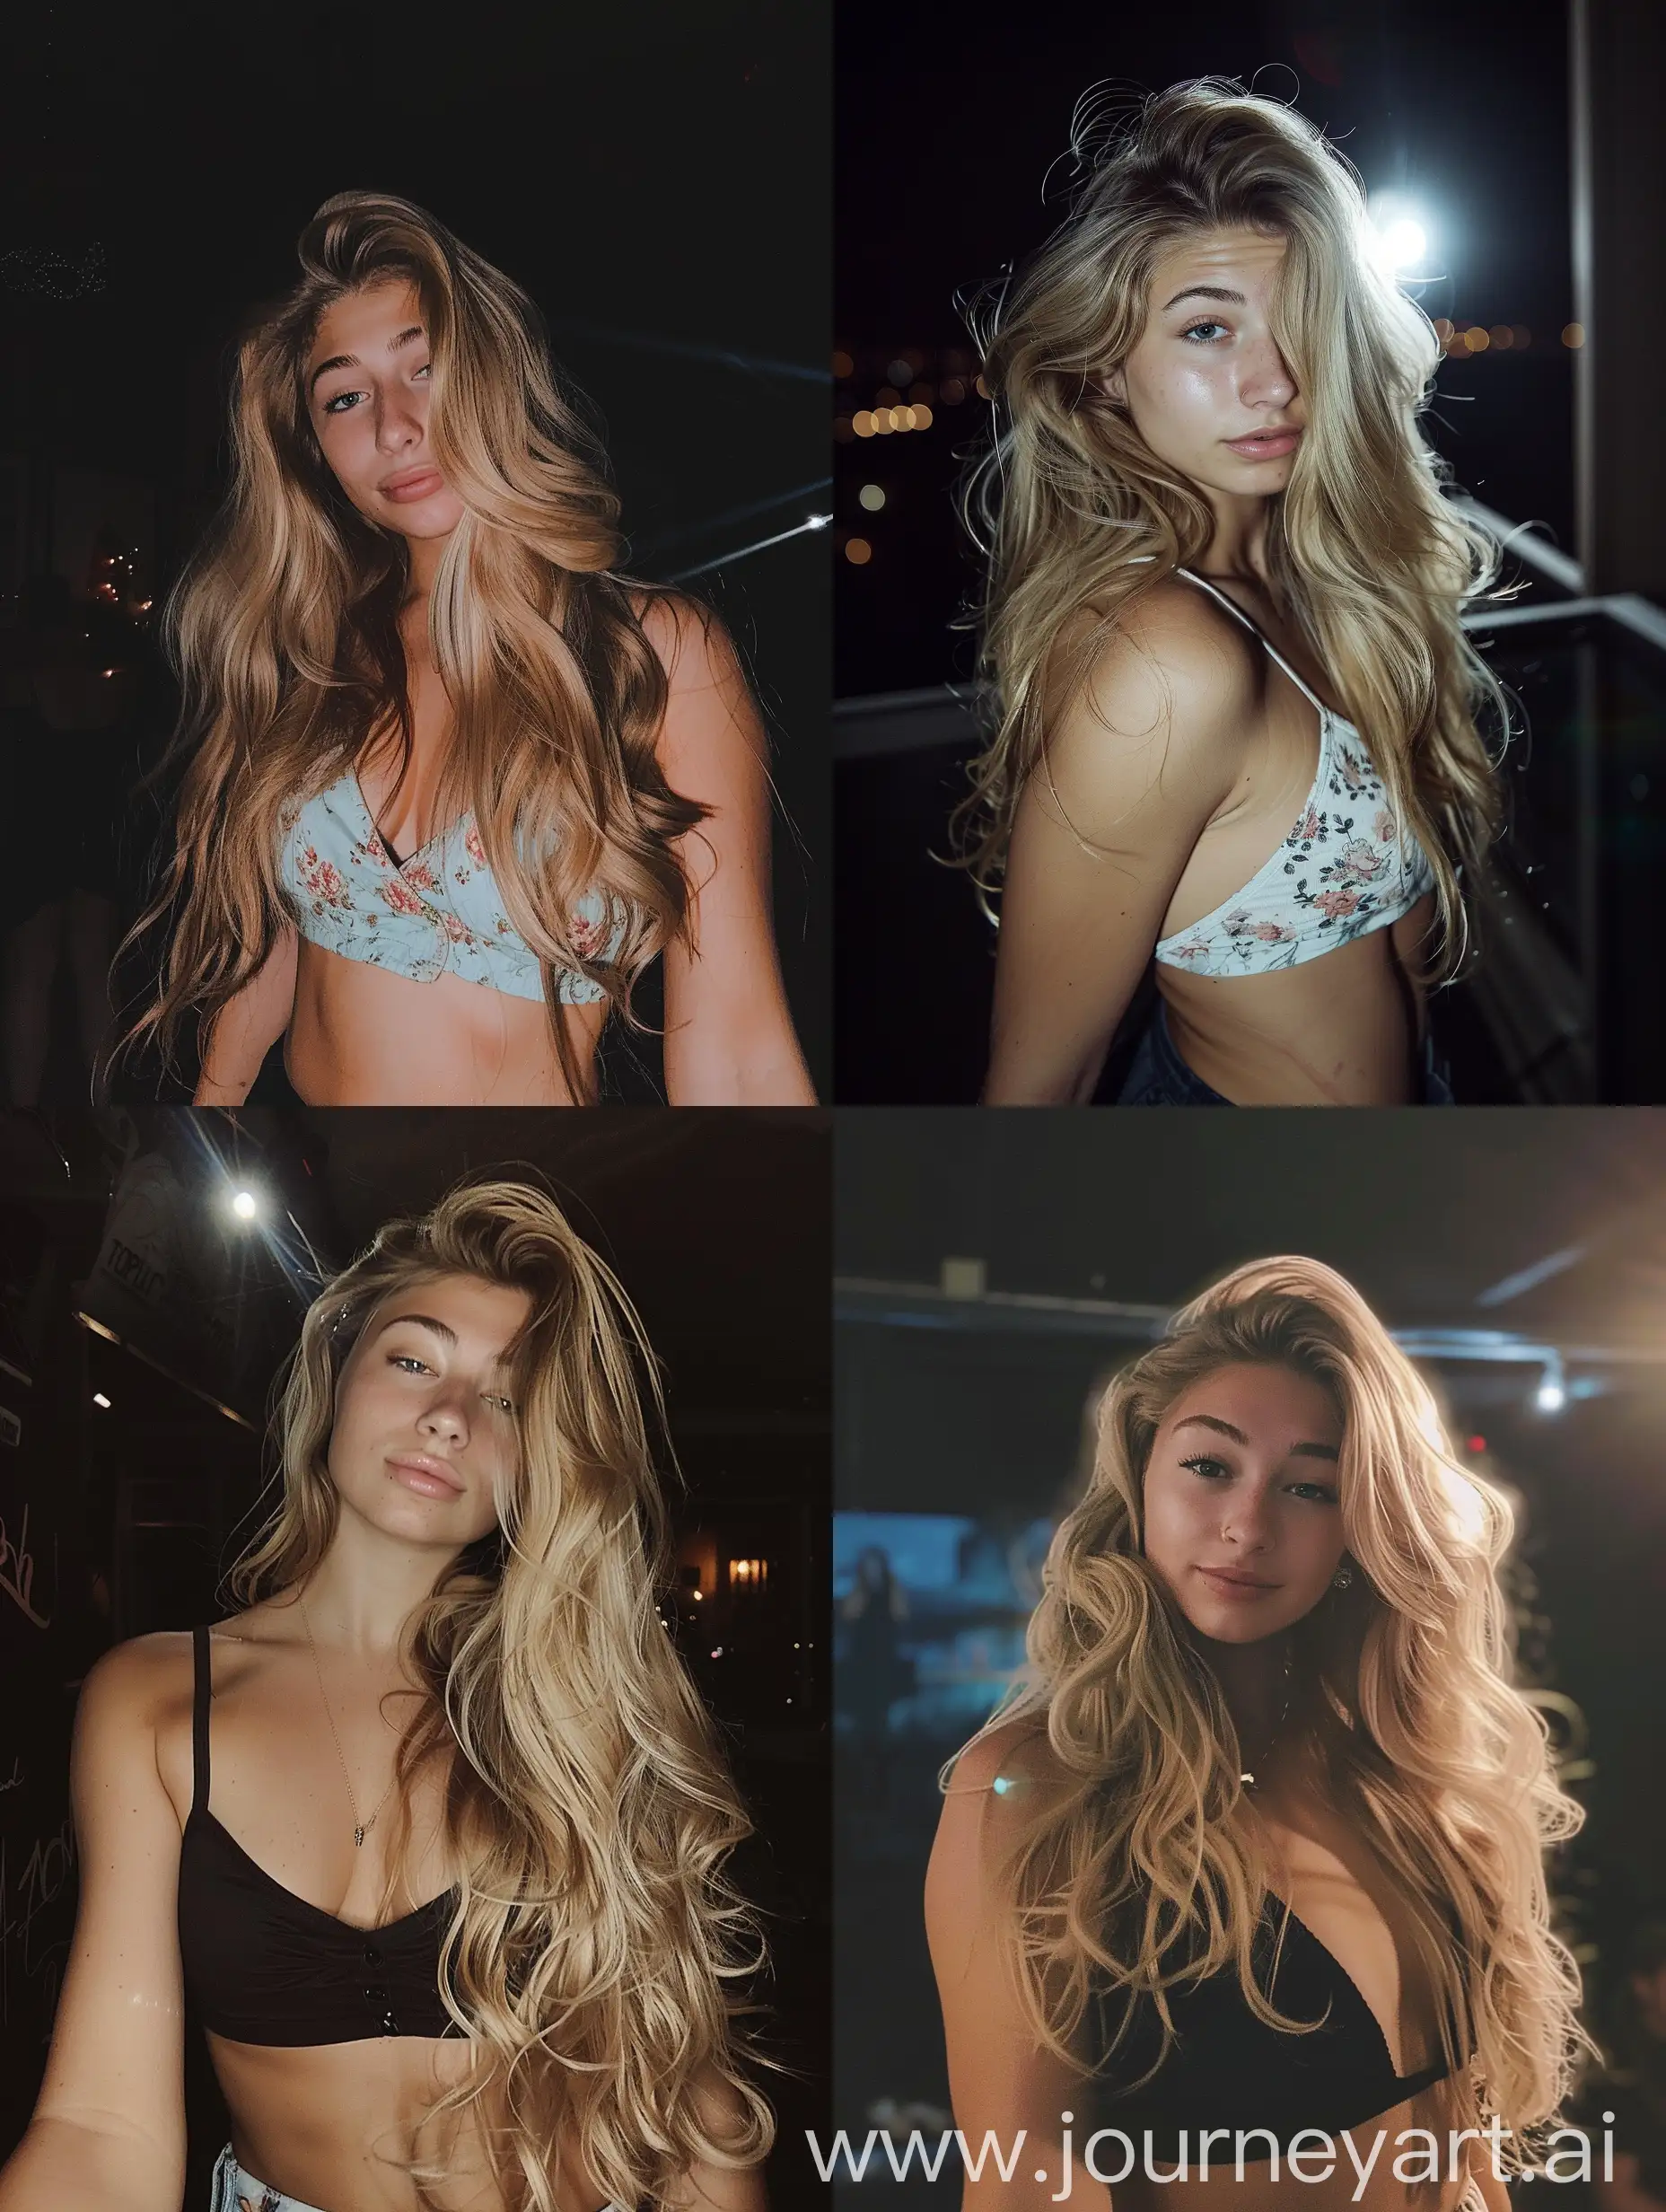 1 girl, 19 years old,  blond hair, at the party, at night, flash, flash light, , makeup, beauty, black dress, fitness